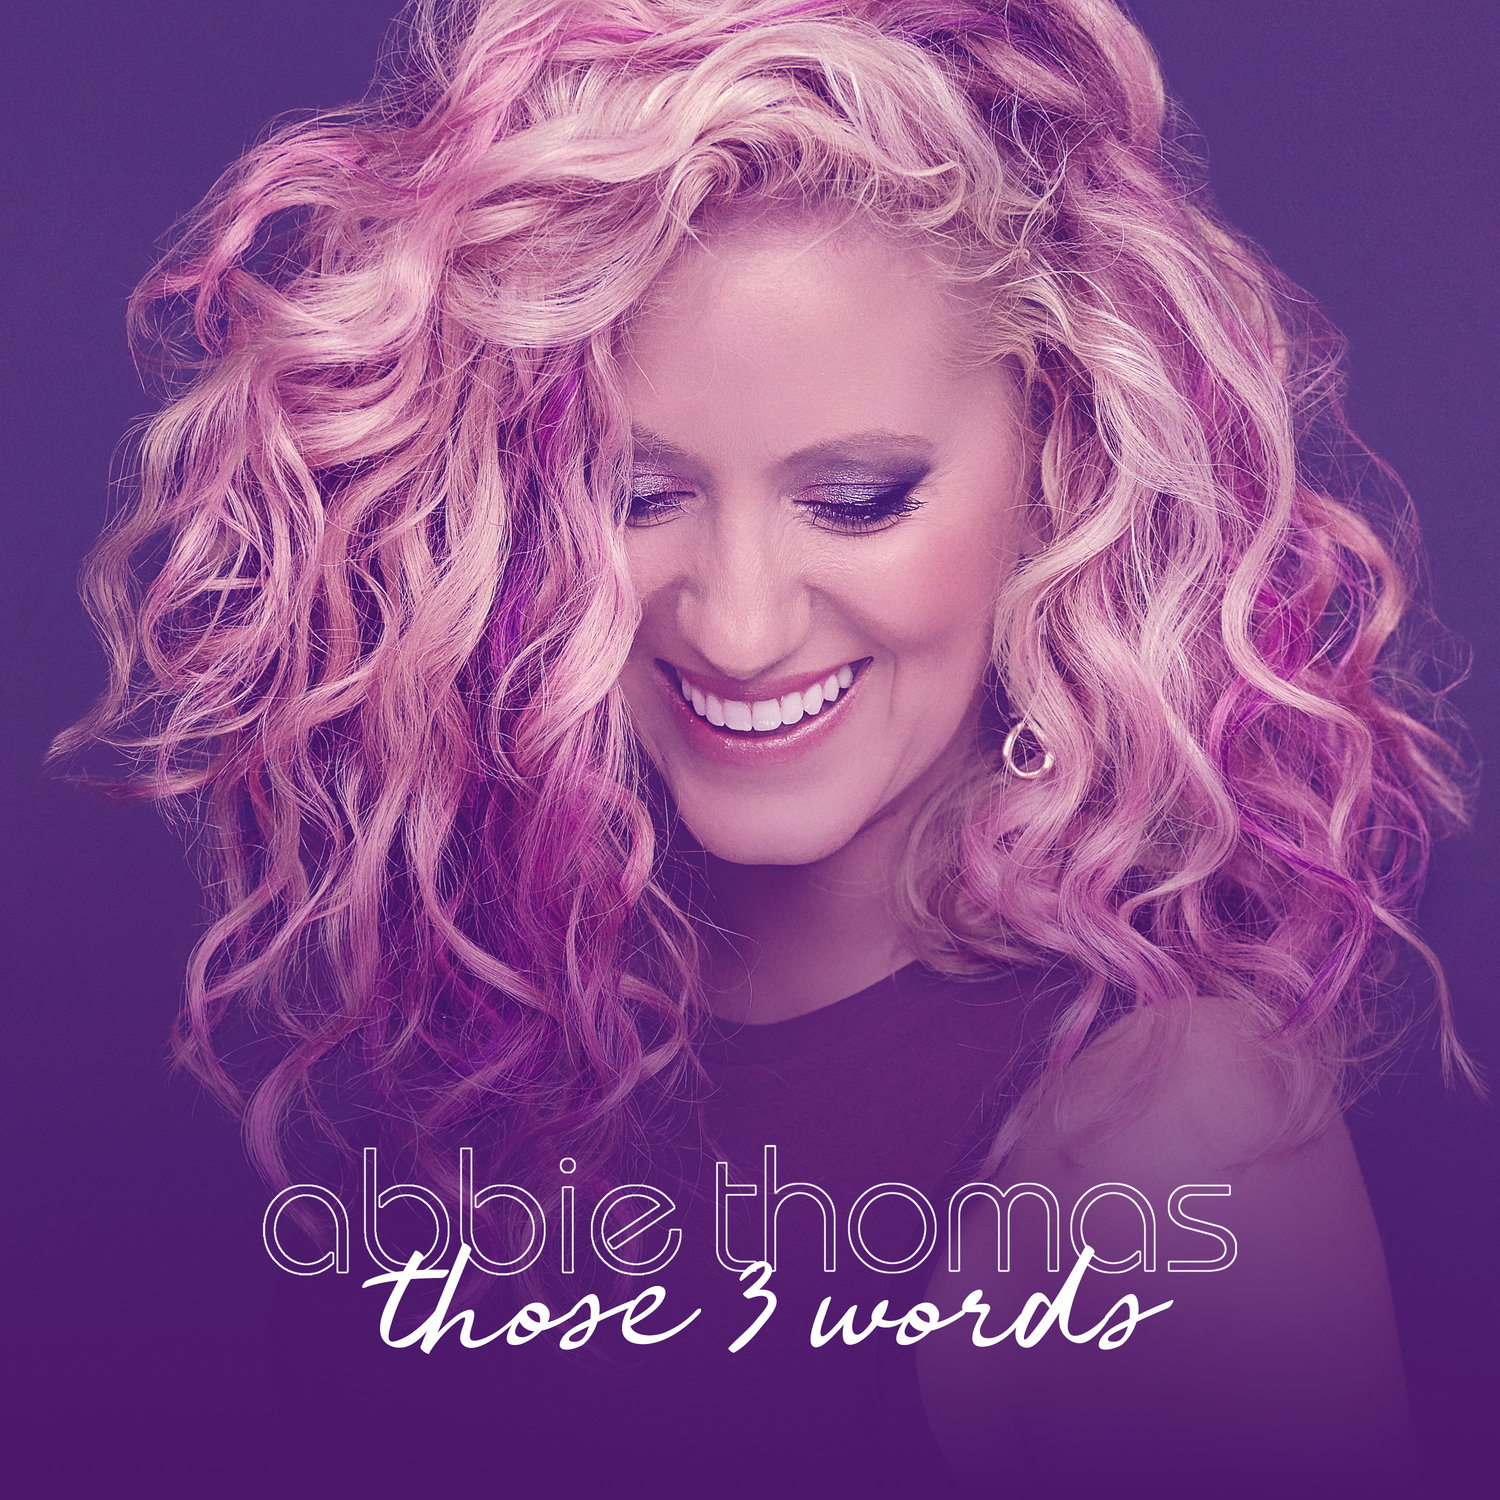 Abbie Thomas released her debut single, Those 3 Words, on April 10, 2020.